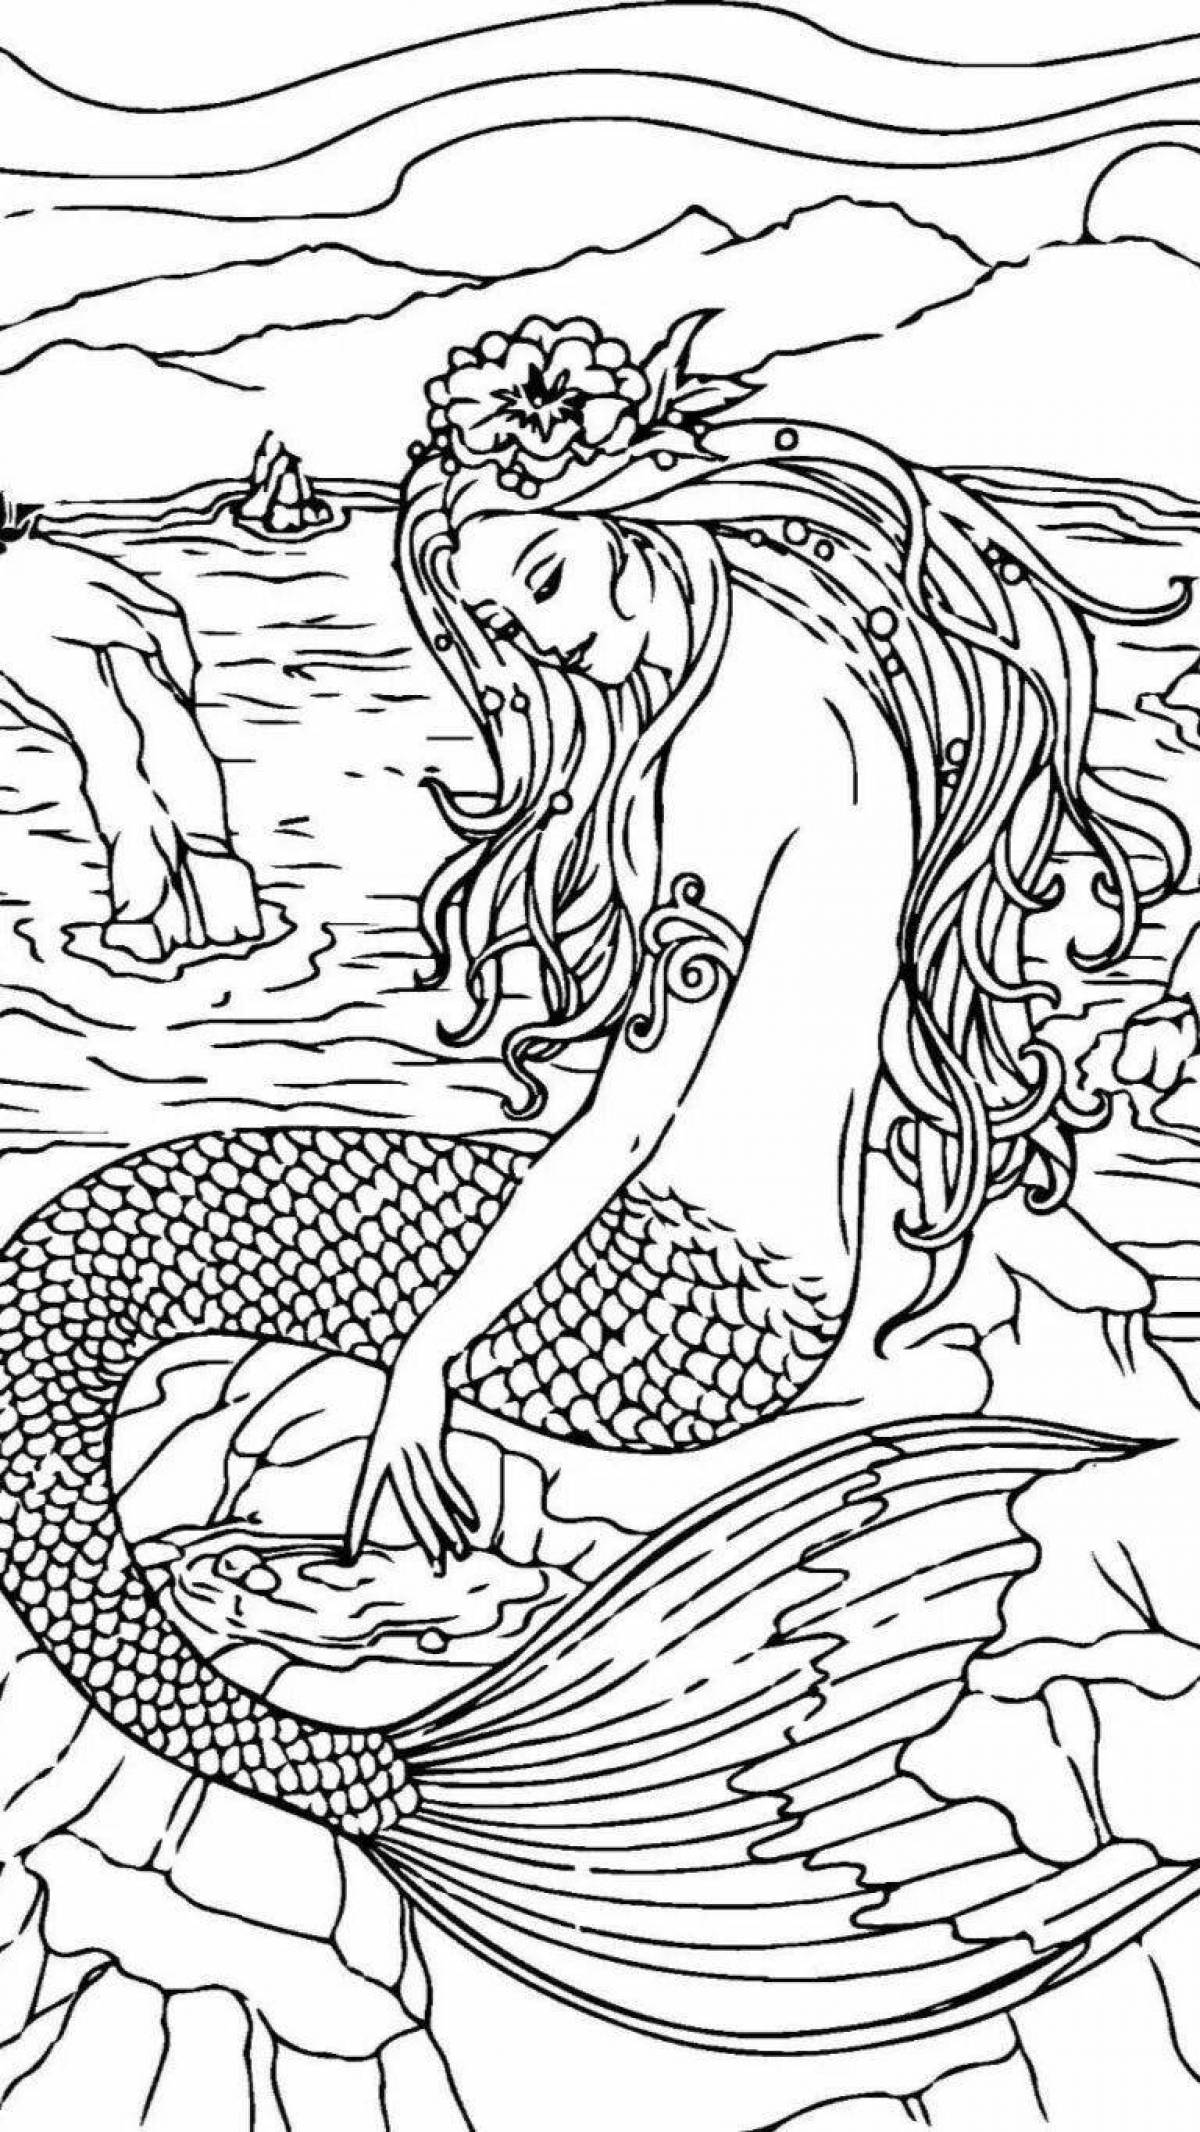 Magic coloring book of a witch from Slavic myths